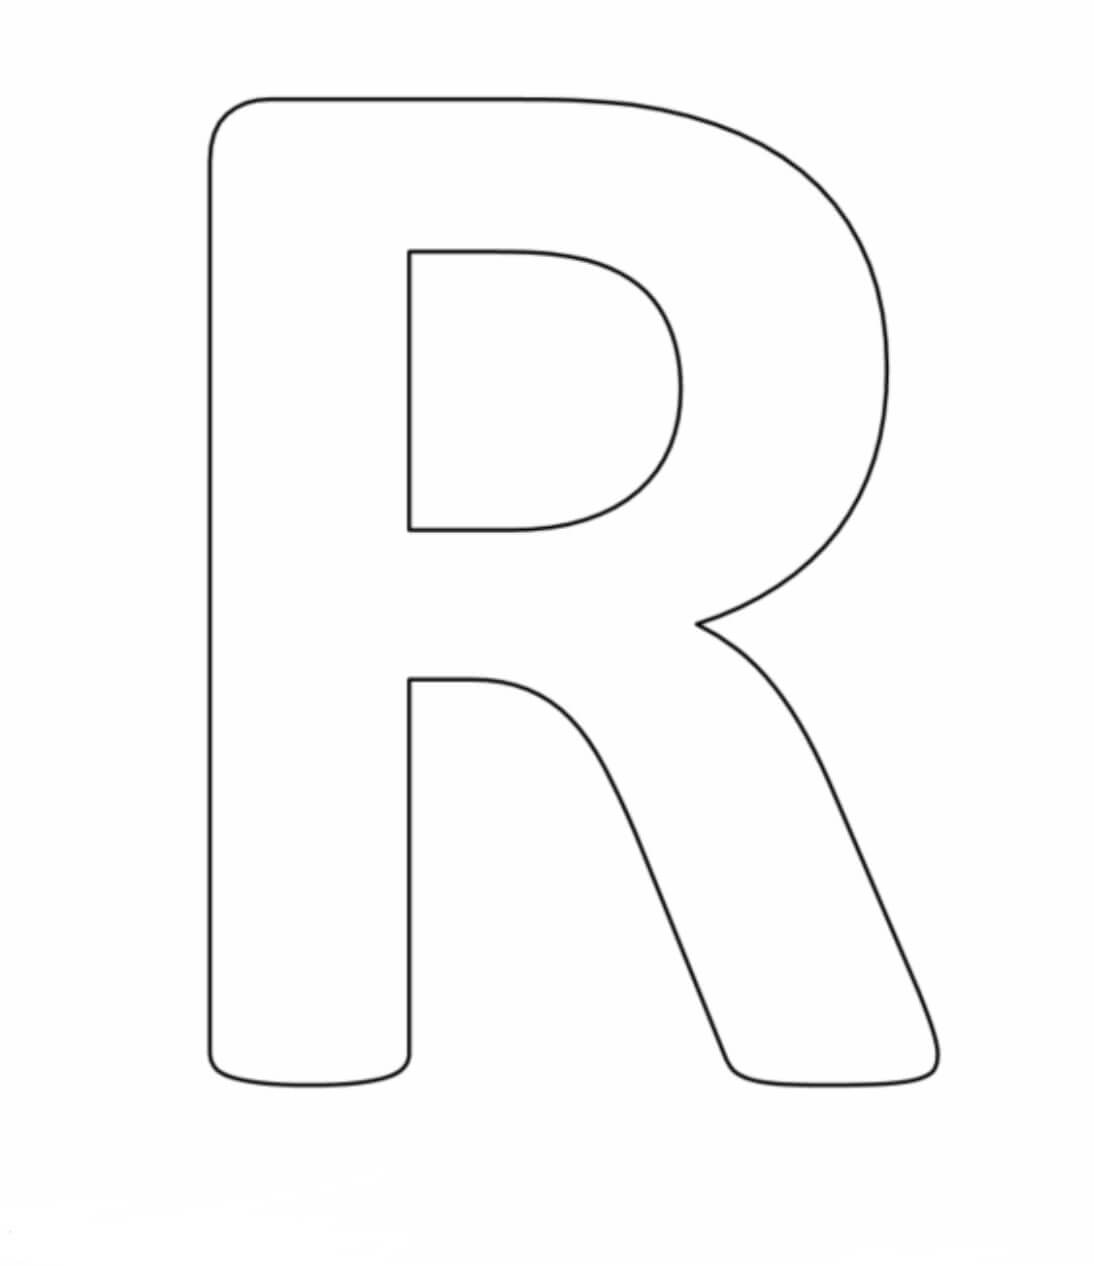 39-letter-r-coloring-sheet-printable